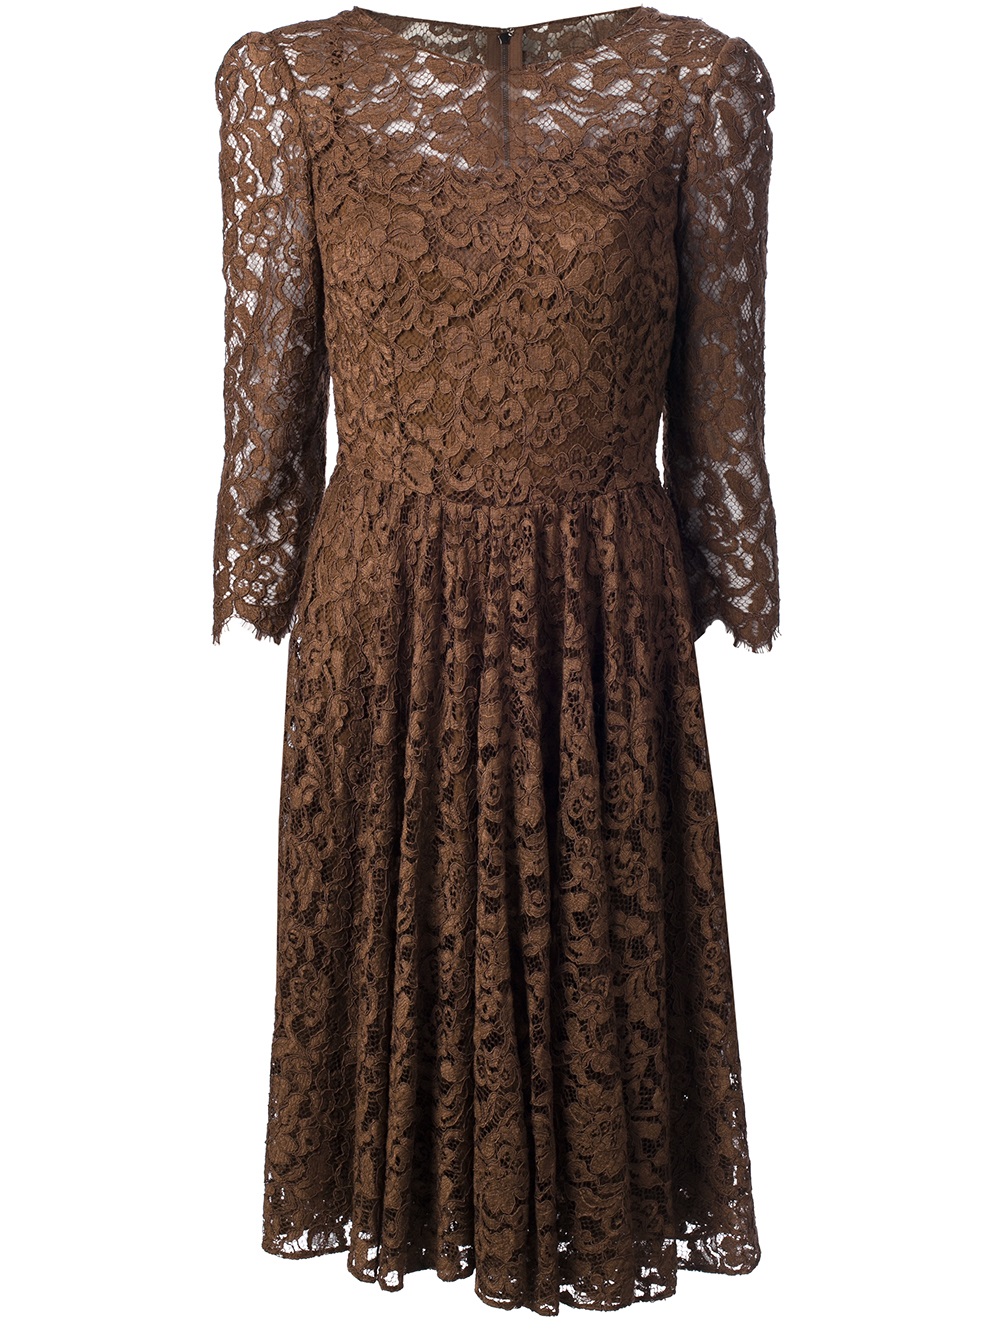 Dolce & Gabbana Lace Dress in Brown - Lyst